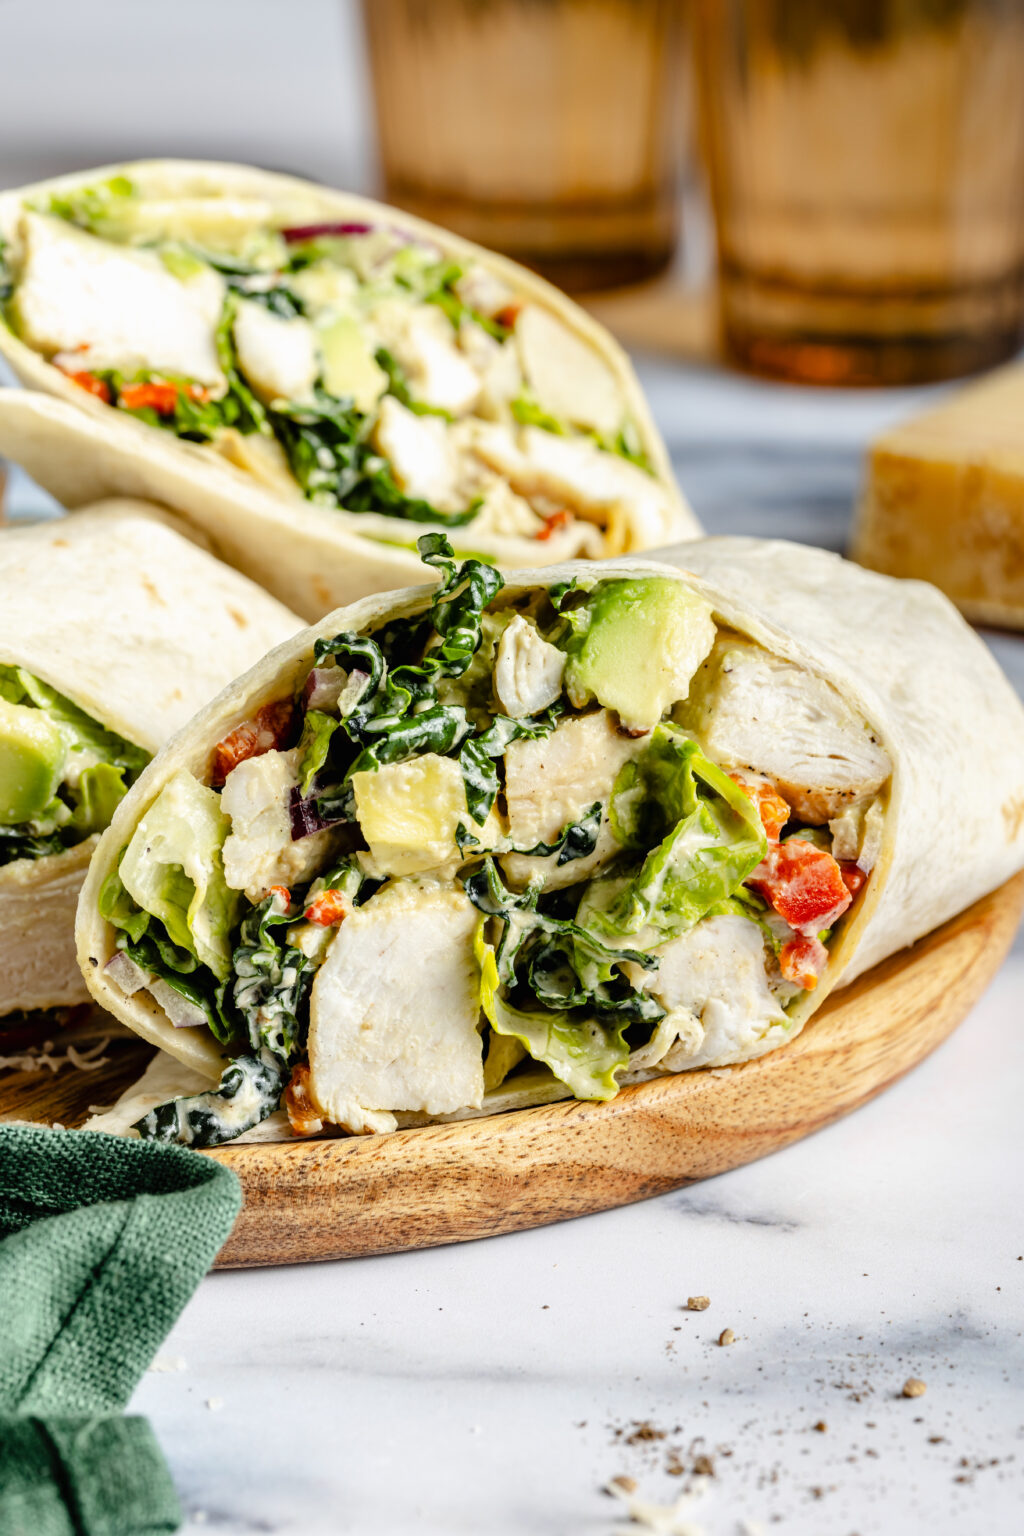 Chicken Caesar Wrap - All the Healthy Things